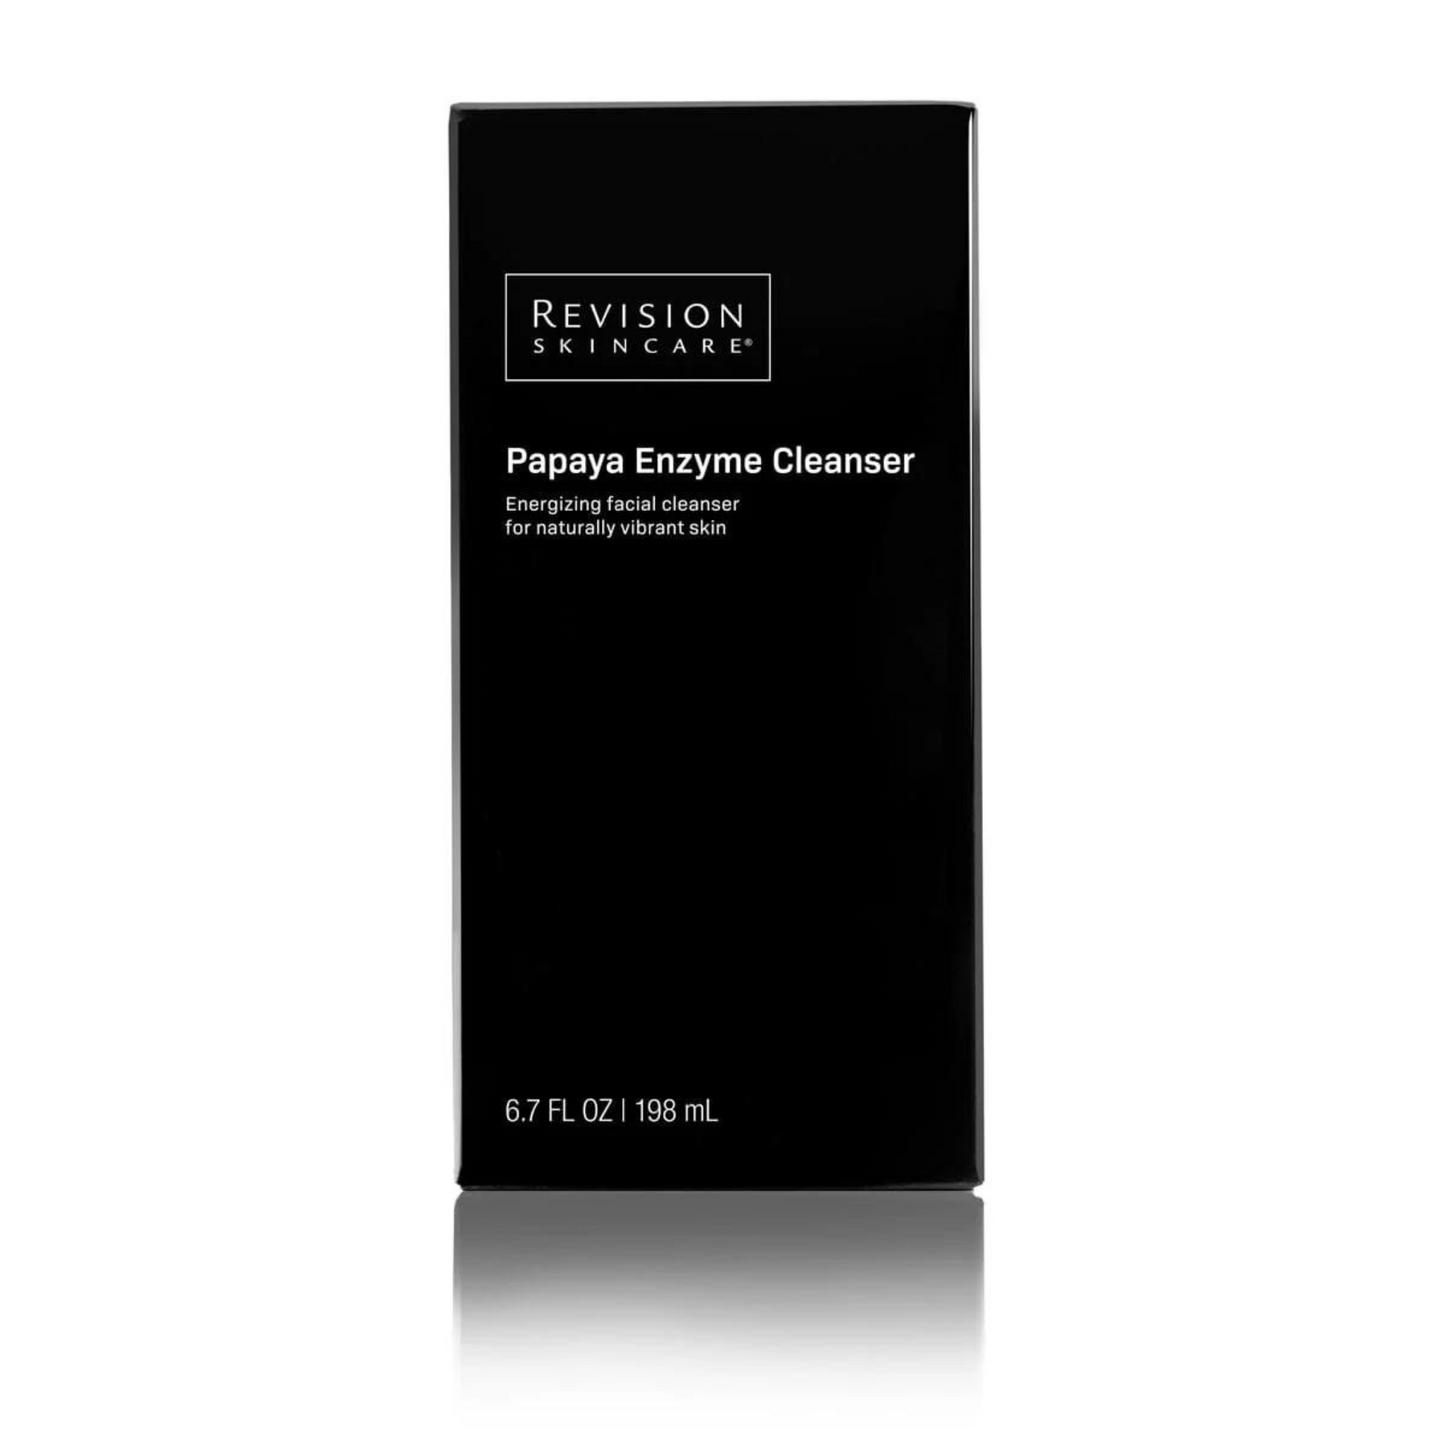 Papaya Enzyme Cleanser | Revision Skincare